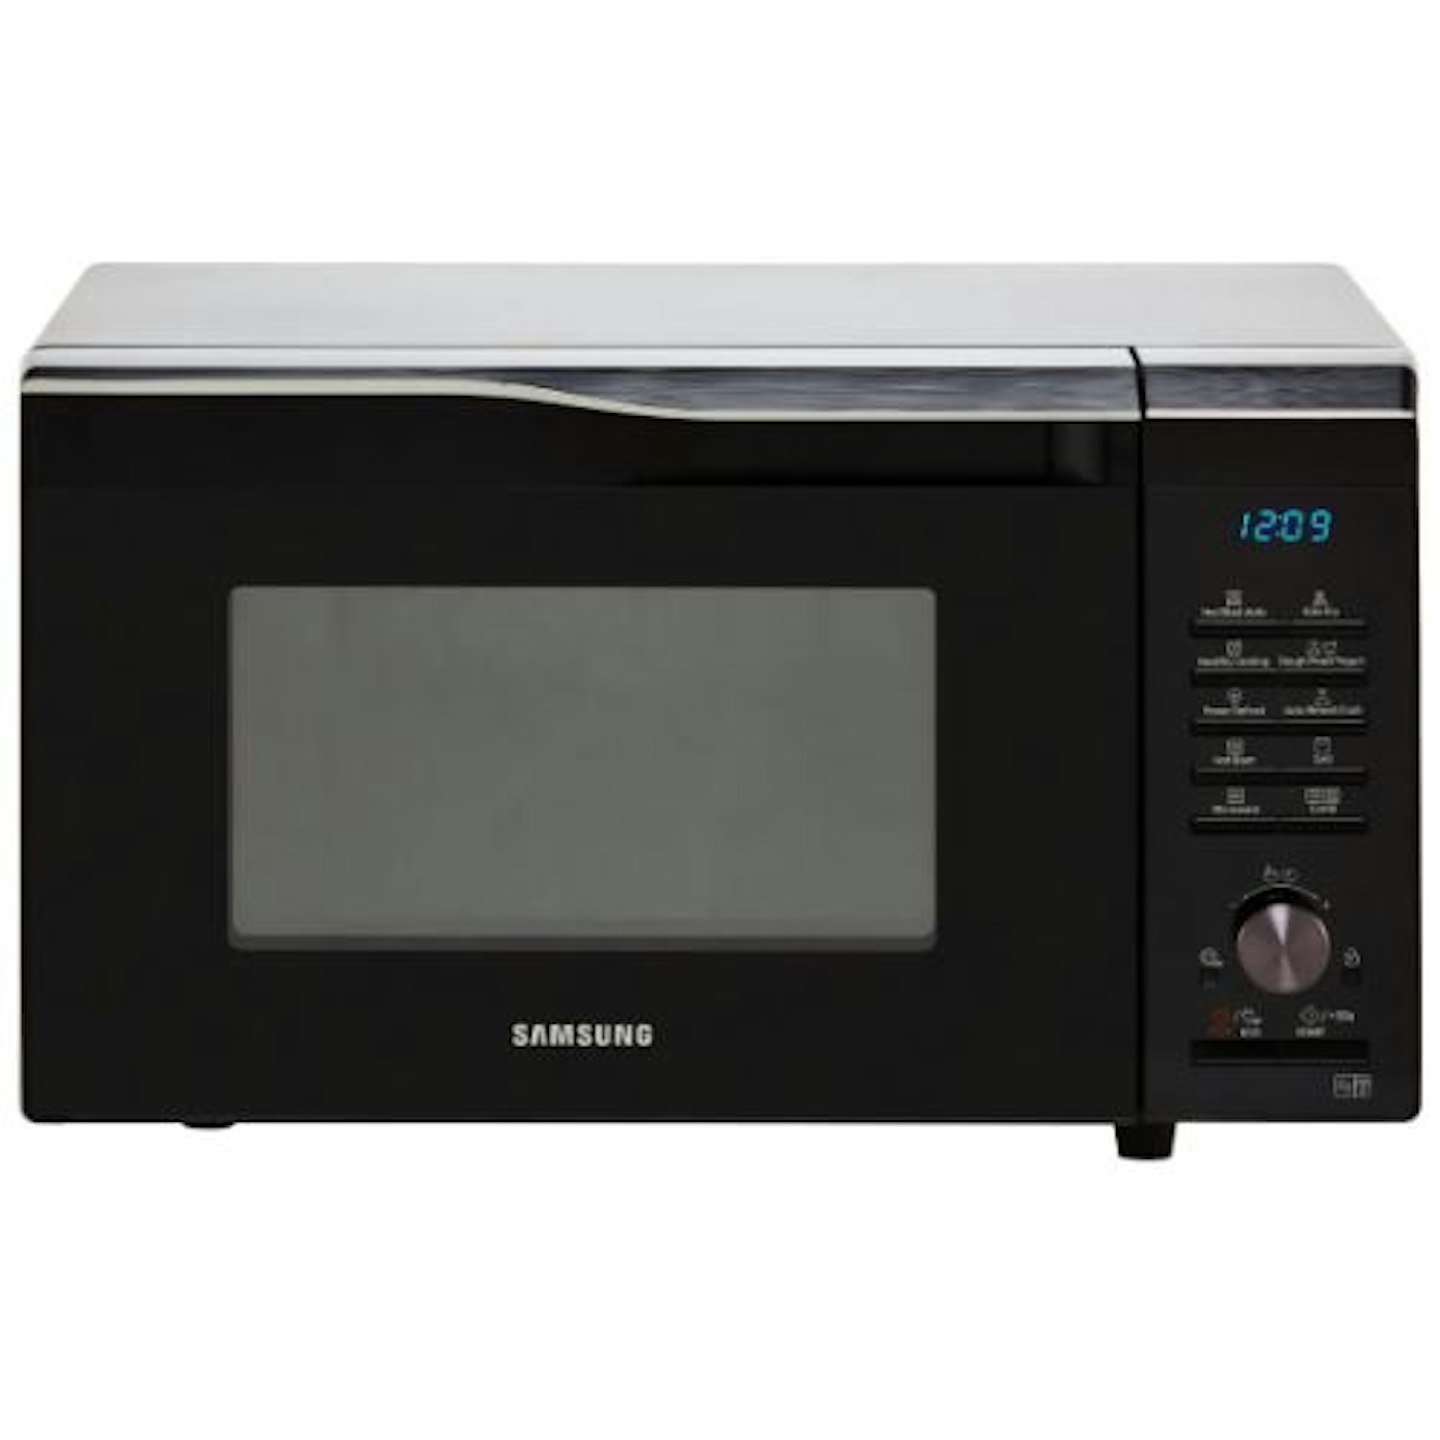 Samsung Easy View MC28M6055CK 28 Litre Combination Microwave Oven